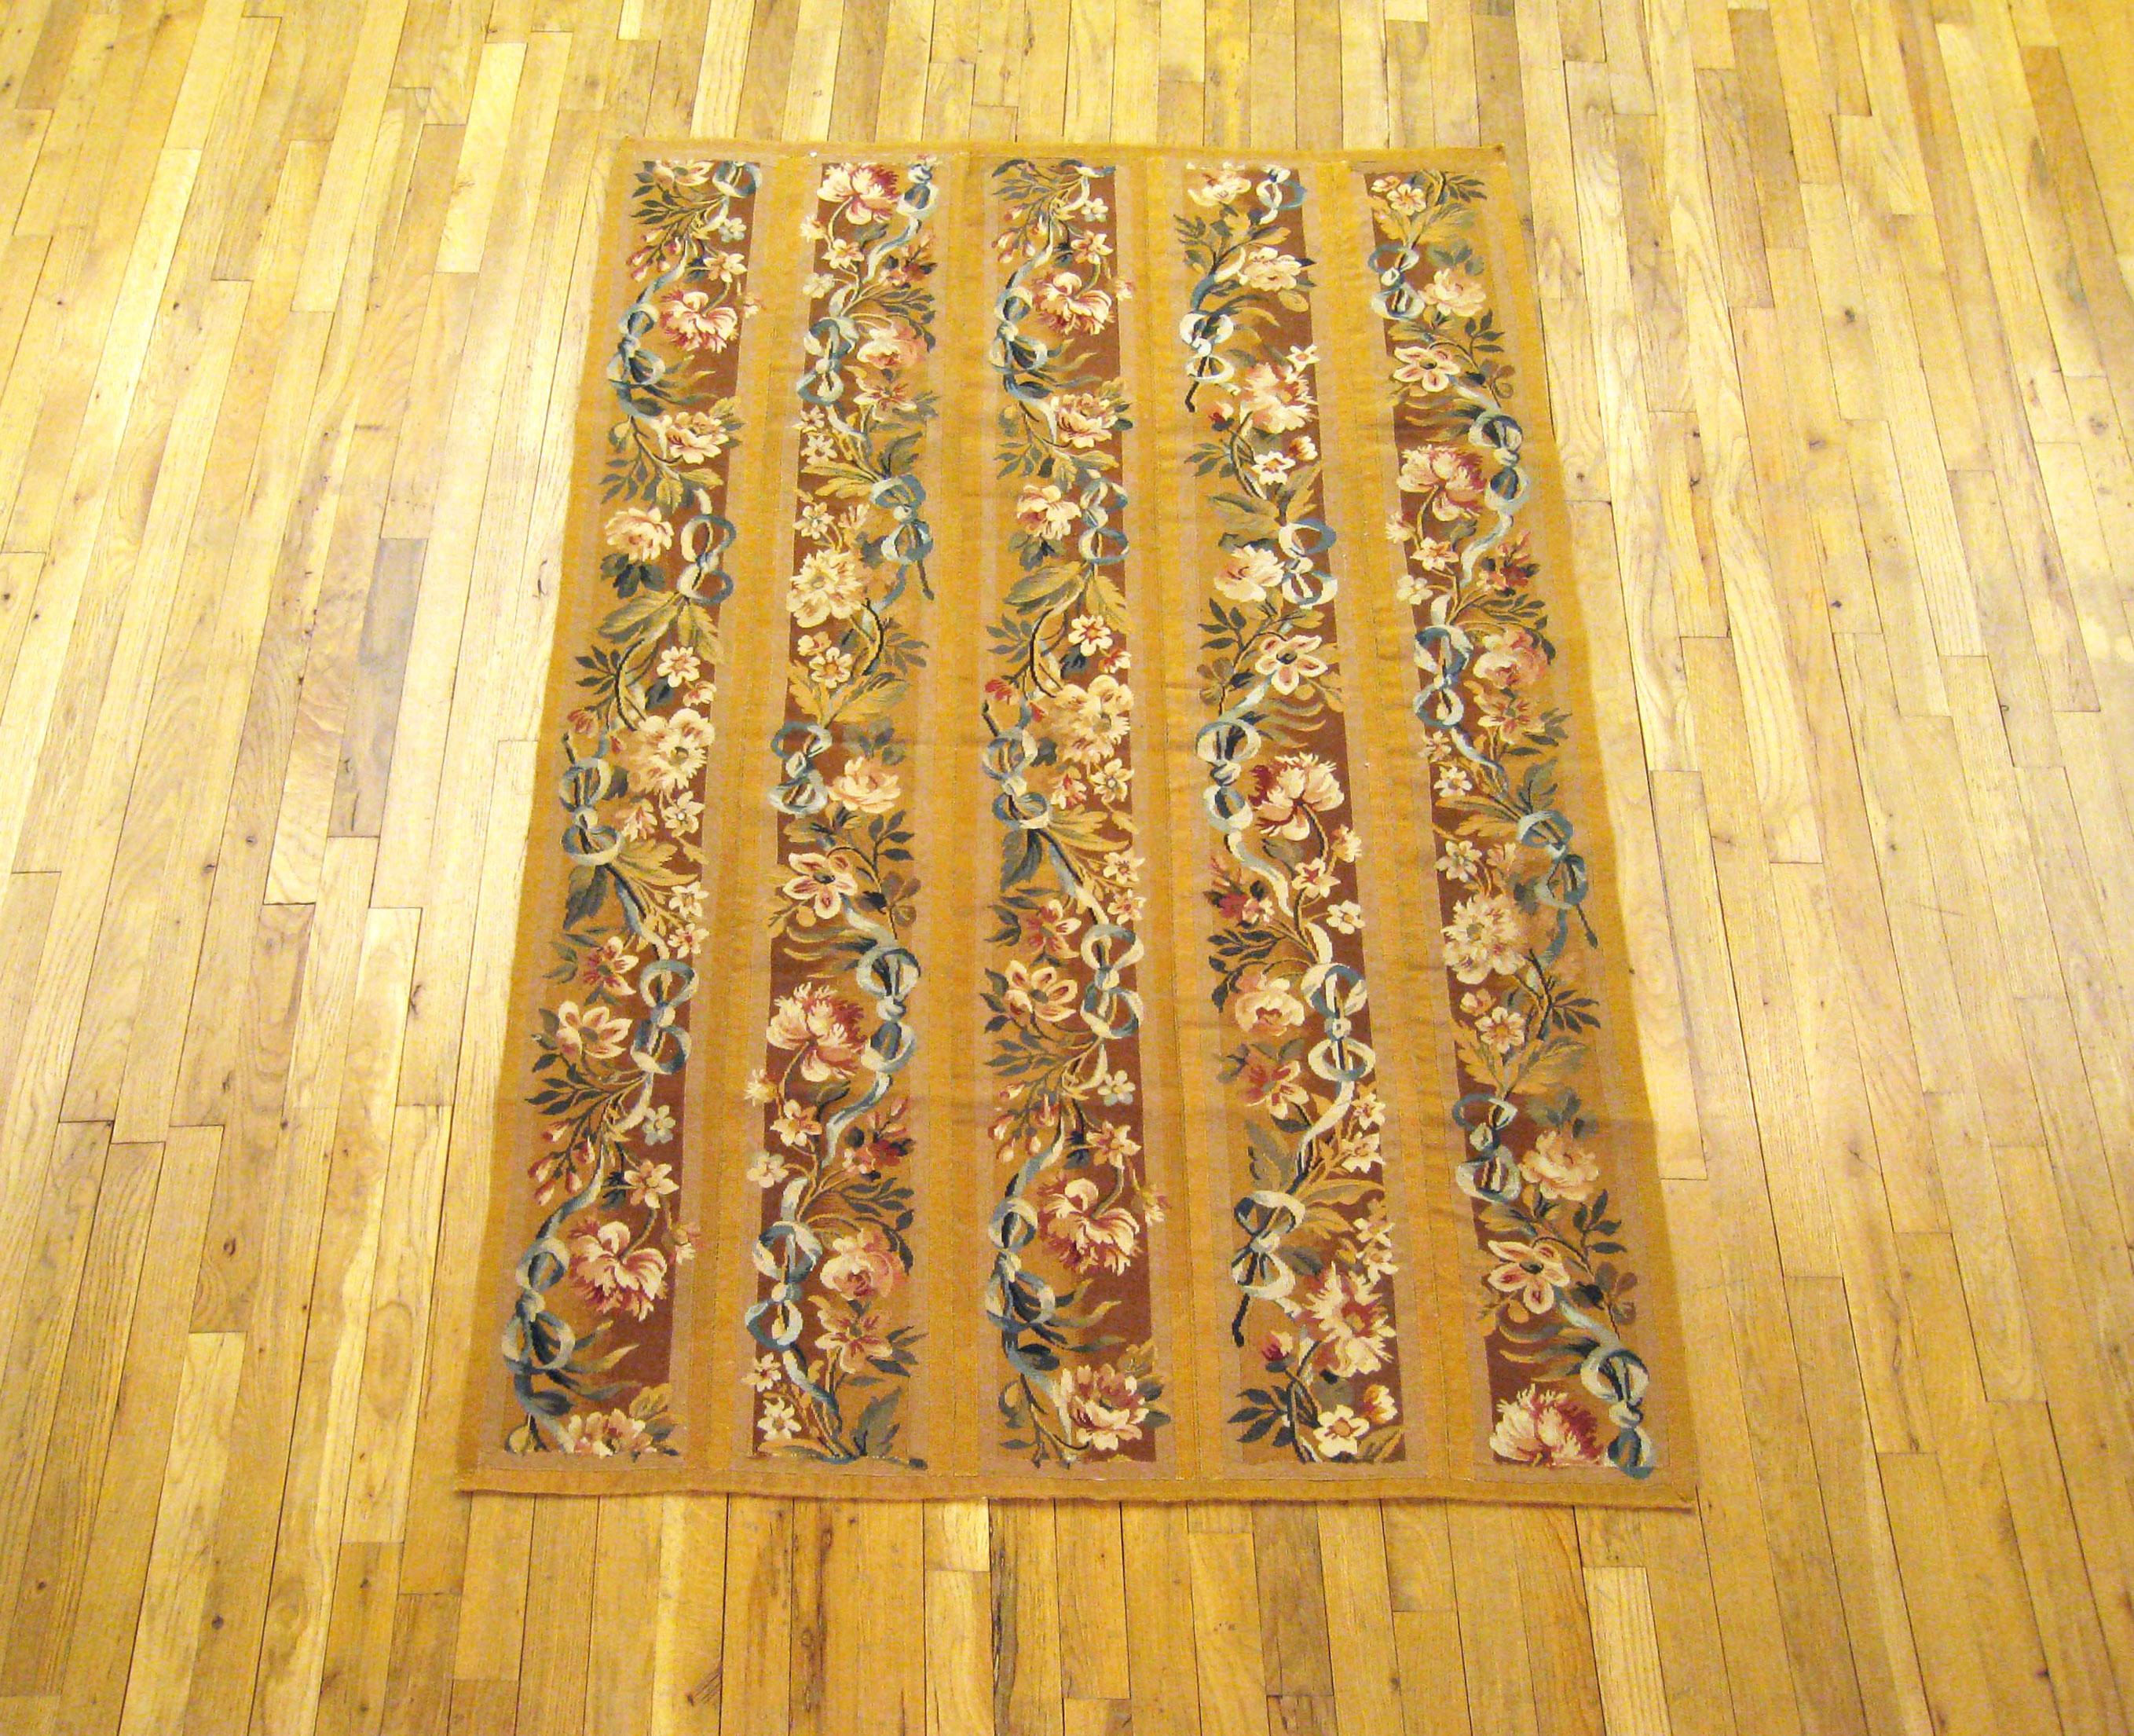 Antique French Aubusson rug, Small size, circa 1890

A one-of-a-kind antique French Aubusson Carpet, hand-knotted with soft wool pile. This lovely hand-knotted wool rug features floral elements allover the brown primary field, with a delicate gold